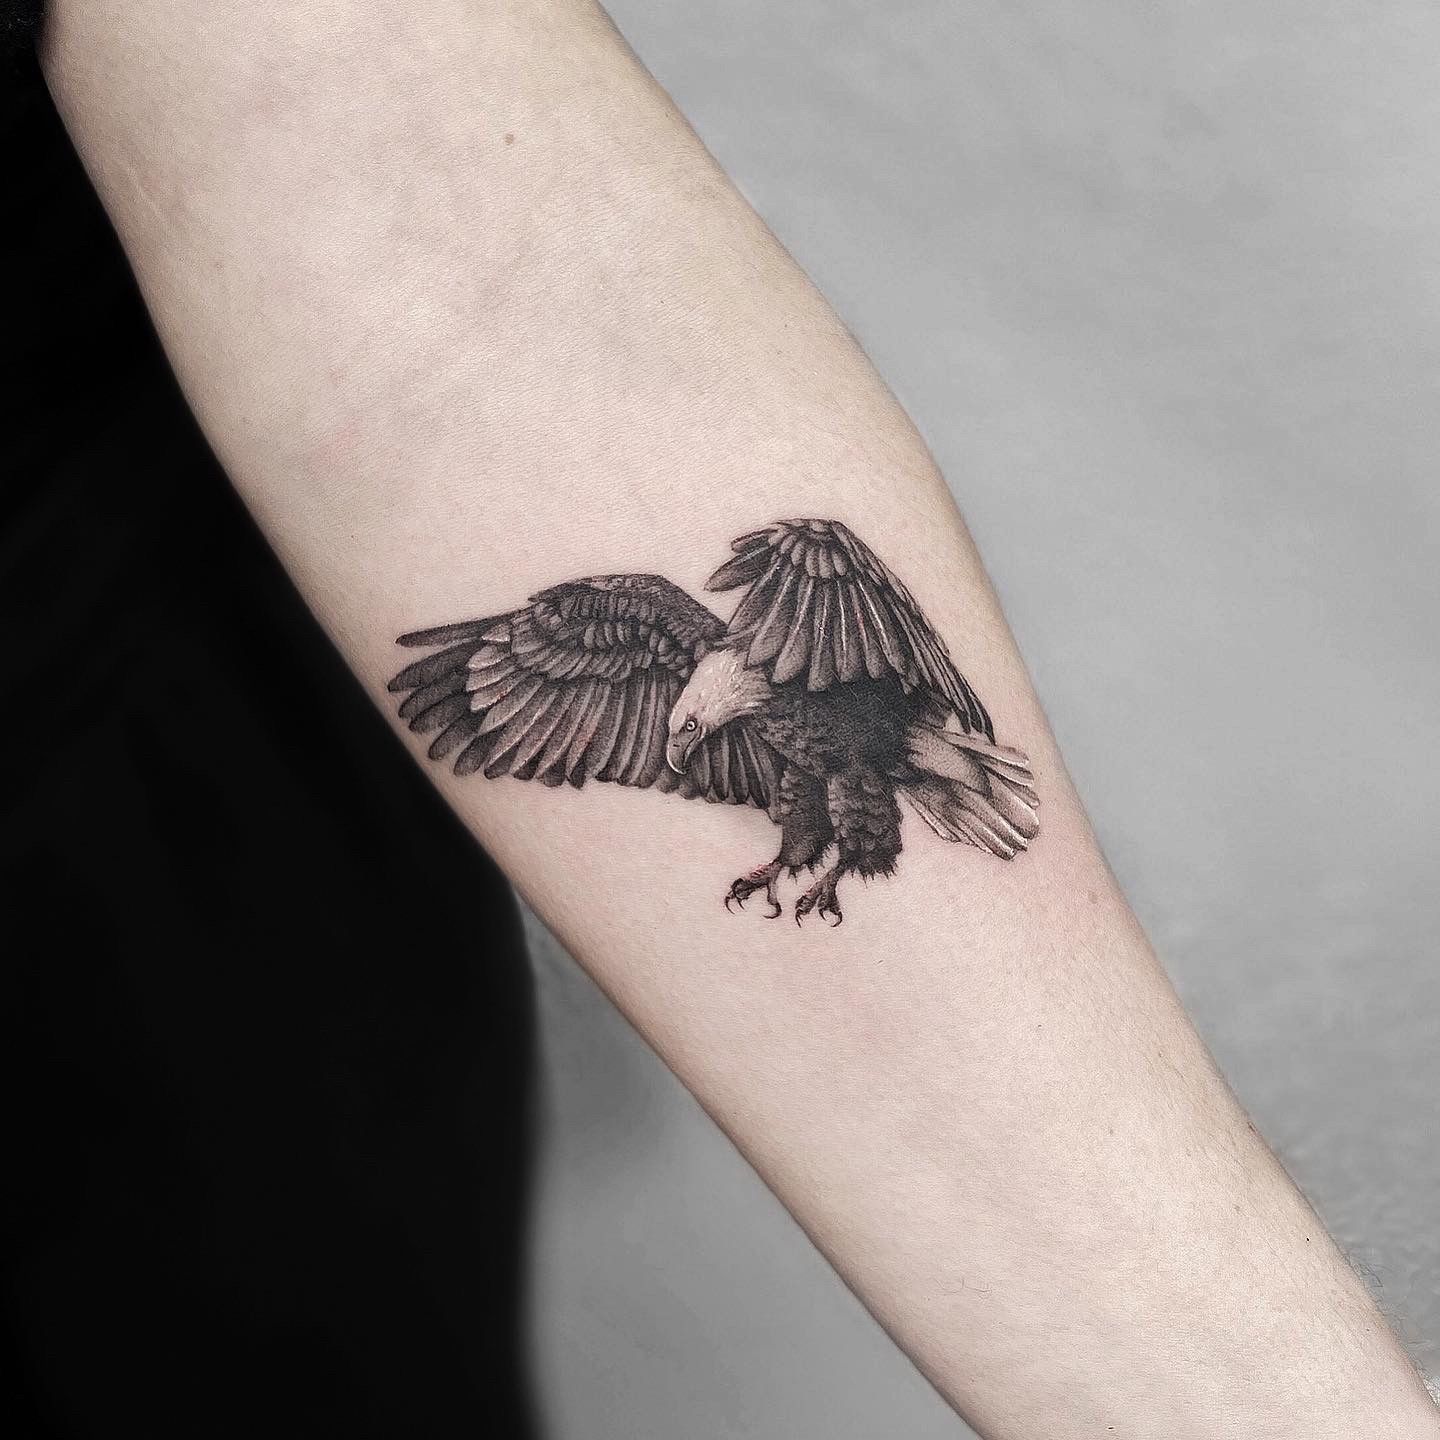 Red Eagle tattoo - aged 2 years and 28 years : r/agedtattoos